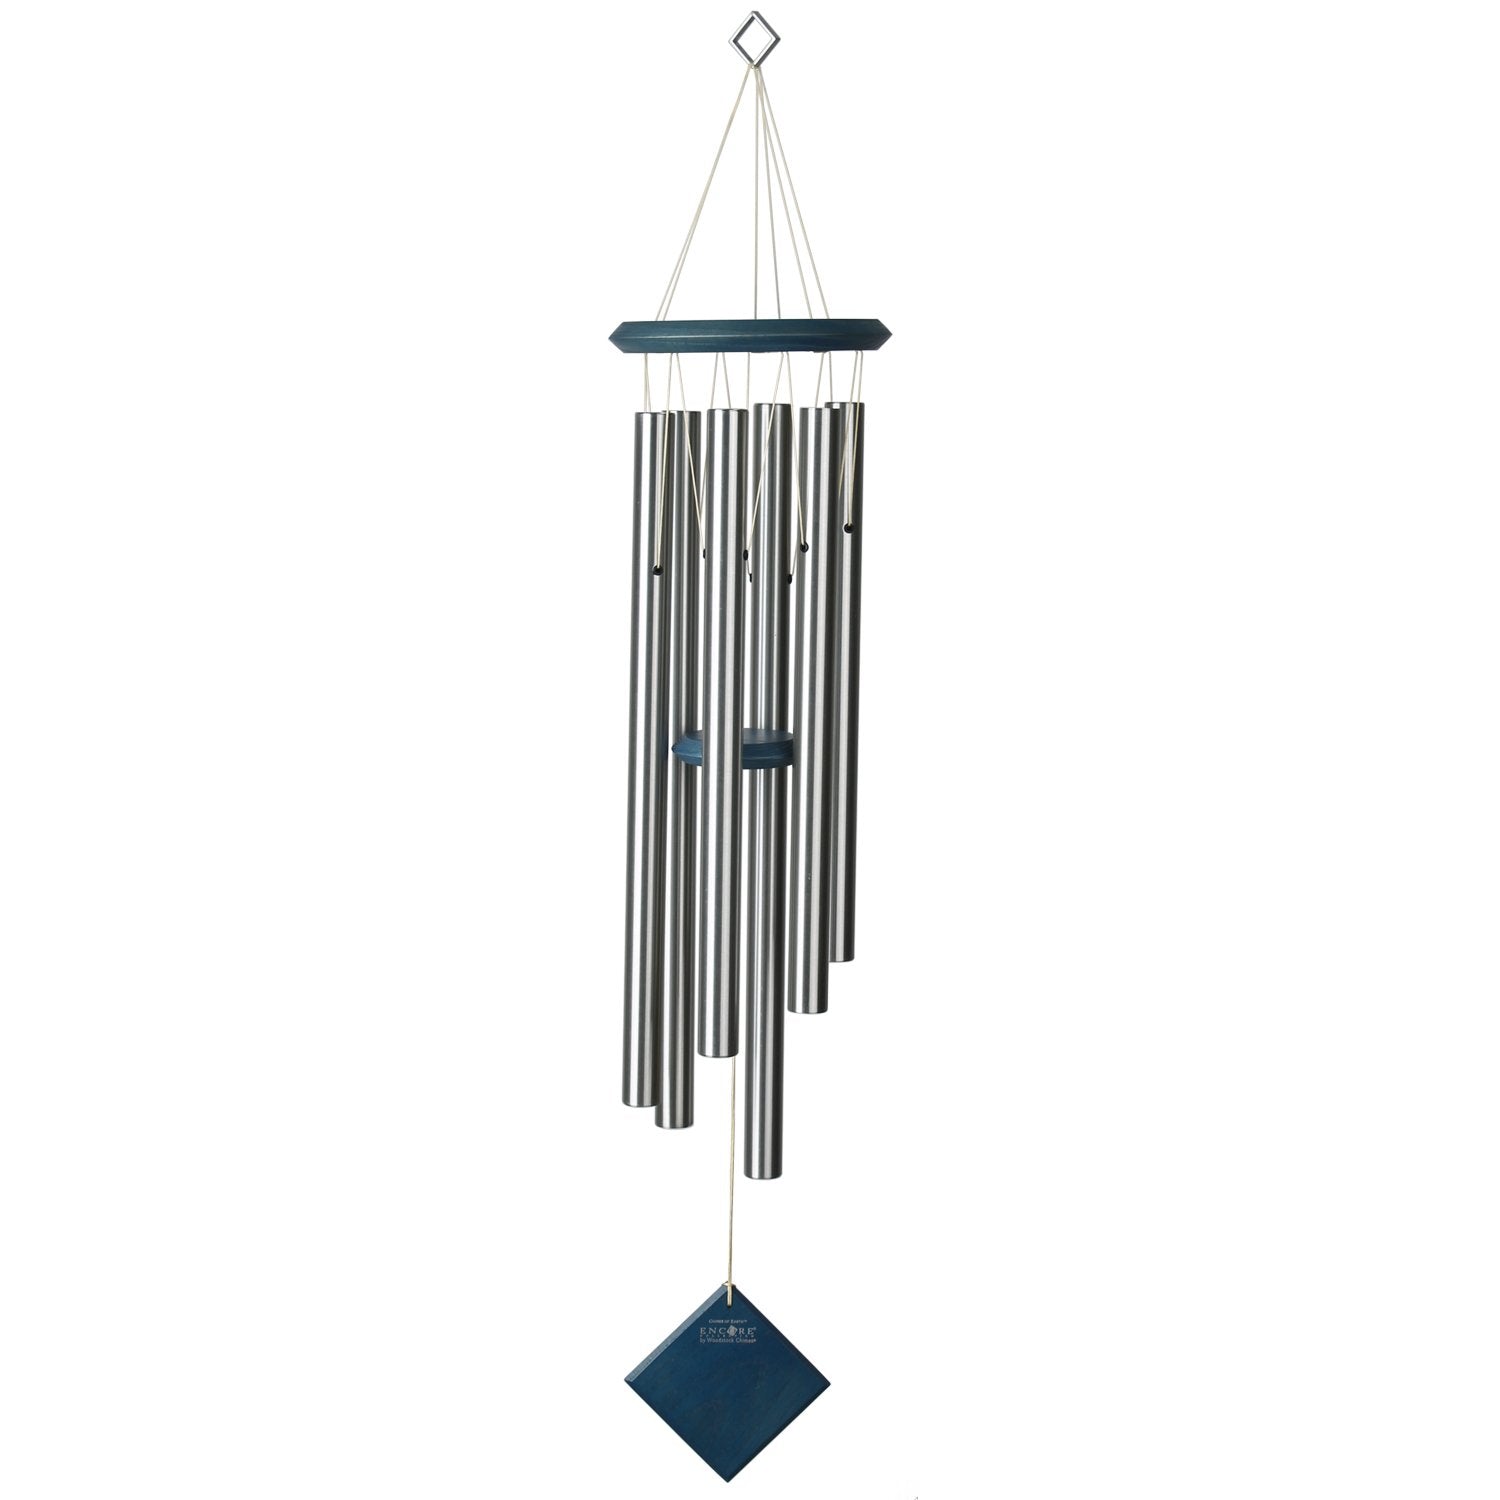 Encore Chimes of Earth - Blue Wash full product image